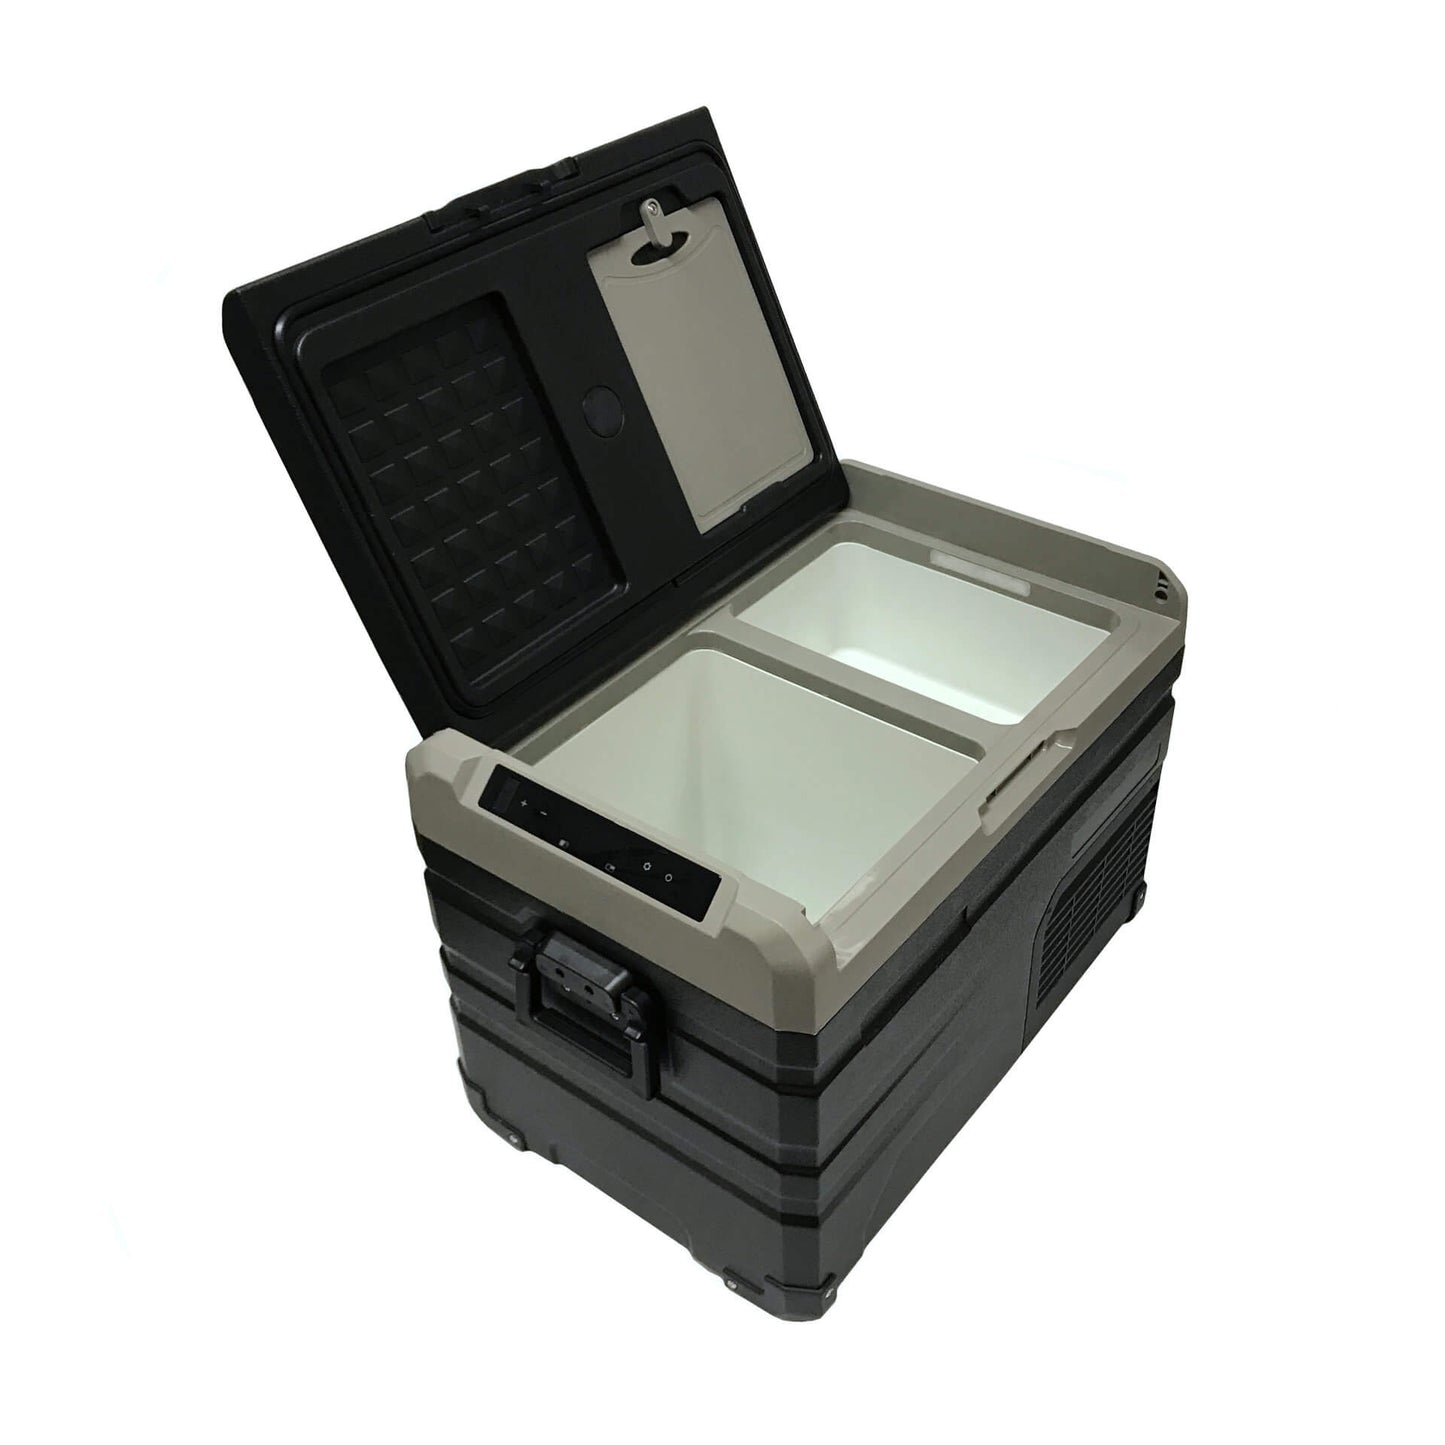 35 Litre Dual Zone Portable Compressor Camping Refrigerator and Freezer -  - sold by Direct4x4